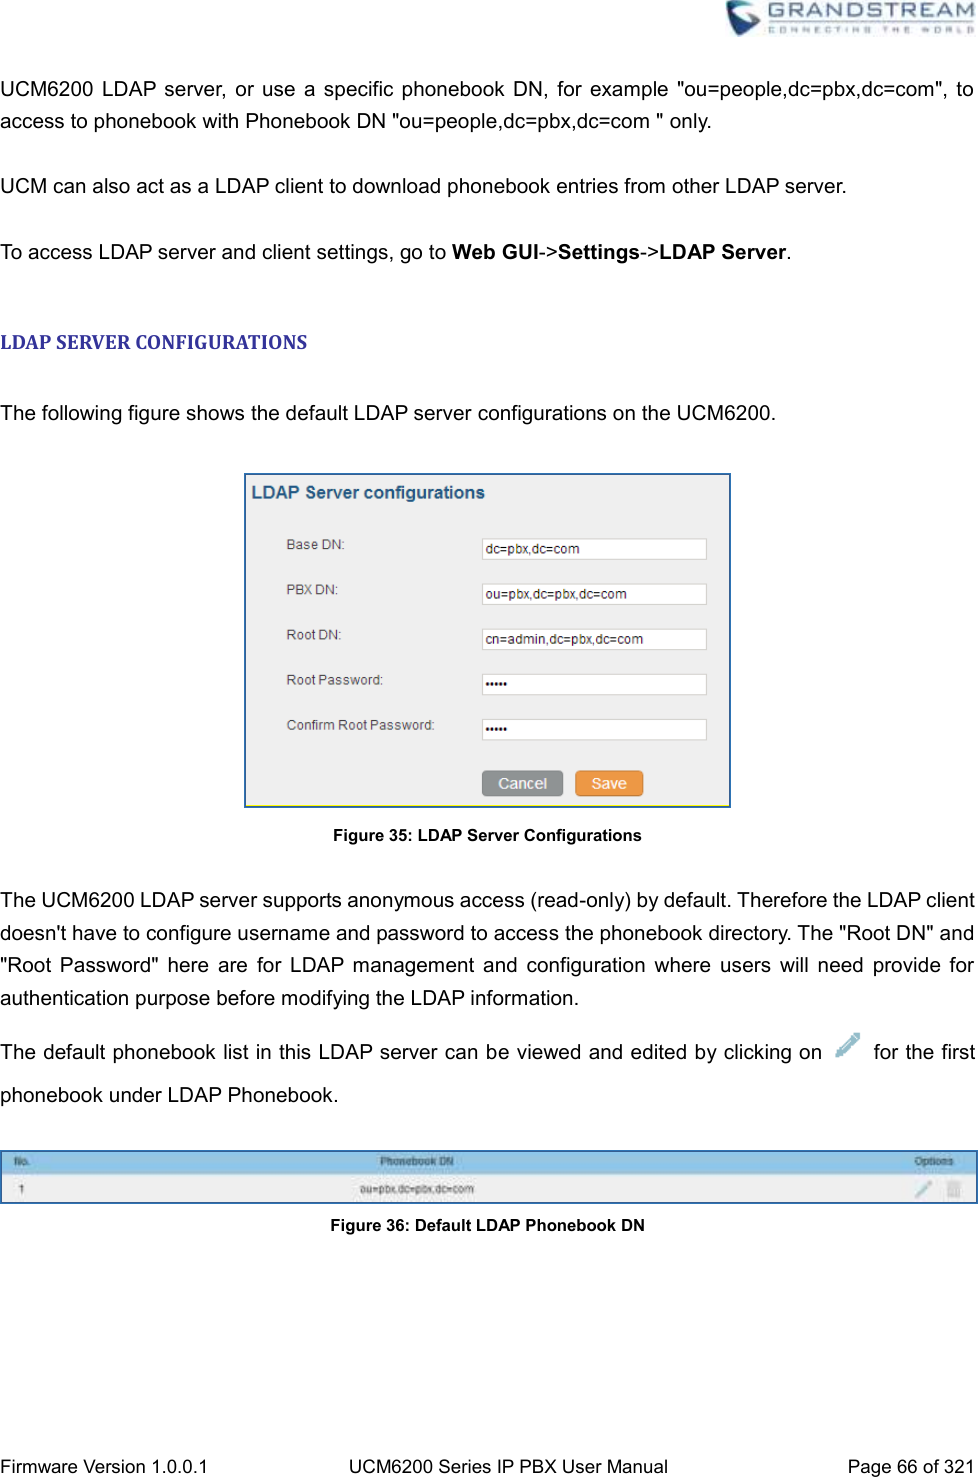  Firmware Version 1.0.0.1 UCM6200 Series IP PBX User Manual Page 66 of 321    UCM6200  LDAP server, or  use a specific phonebook  DN,  for  example  &quot;ou=people,dc=pbx,dc=com&quot;, to access to phonebook with Phonebook DN &quot;ou=people,dc=pbx,dc=com &quot; only.  UCM can also act as a LDAP client to download phonebook entries from other LDAP server.  To access LDAP server and client settings, go to Web GUI-&gt;Settings-&gt;LDAP Server.  LDAP SERVER CONFIGURATIONS  The following figure shows the default LDAP server configurations on the UCM6200.   Figure 35: LDAP Server Configurations  The UCM6200 LDAP server supports anonymous access (read-only) by default. Therefore the LDAP client doesn&apos;t have to configure username and password to access the phonebook directory. The &quot;Root DN&quot; and &quot;Root  Password&quot;  here  are  for  LDAP management  and  configuration  where  users  will  need  provide  for authentication purpose before modifying the LDAP information. The default phonebook list in this LDAP server can be viewed and edited by clicking on    for the first phonebook under LDAP Phonebook.   Figure 36: Default LDAP Phonebook DN  